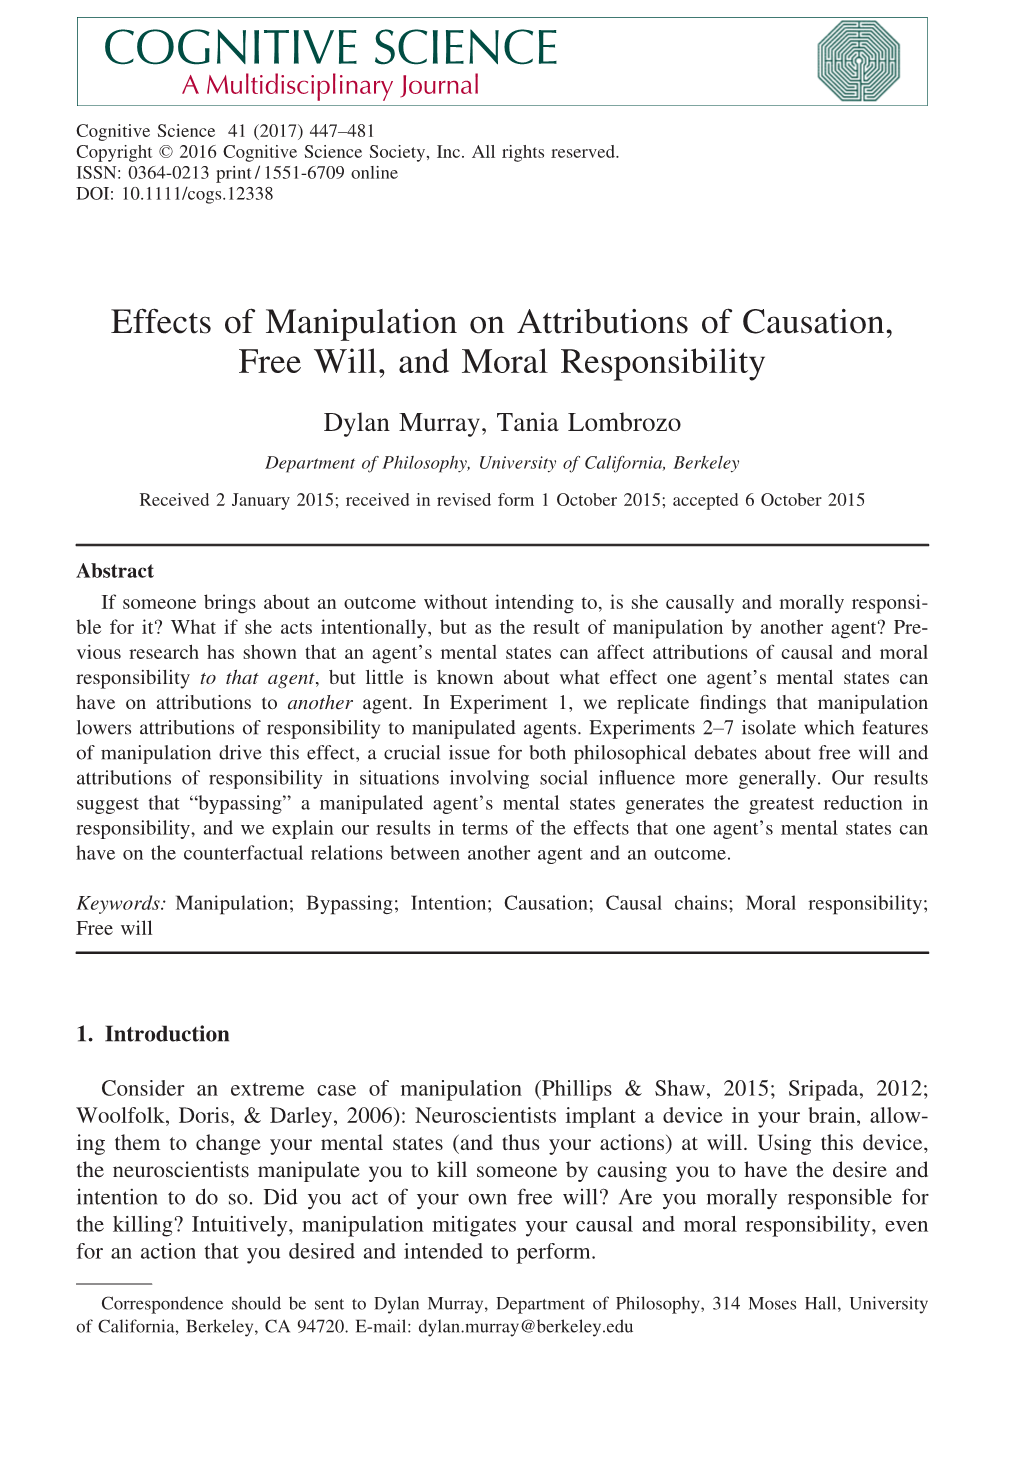 Effects of Manipulation on Attributions of Causation, Free Will, and Moral Responsibility